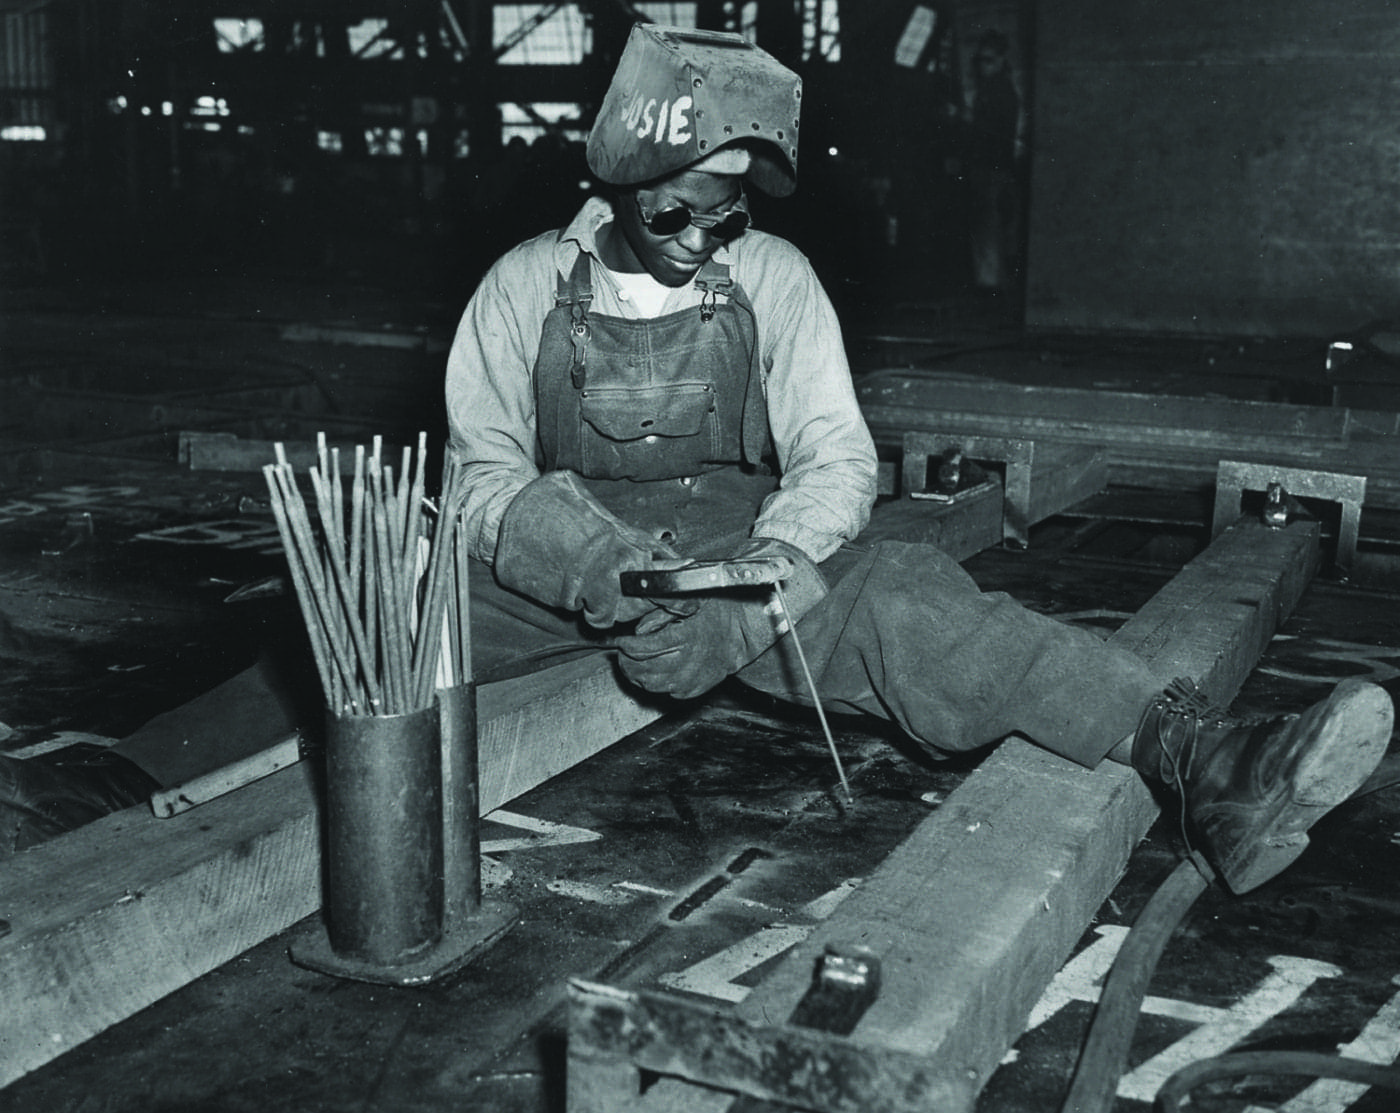 Welder-Josie-Lucille-Owens-building-the-SS-George-Washington-Carver-WWII-from-Office-for-Emergency-Management-1400x1113, Cowgirl of the sky, Culture Currents Local News & Views 